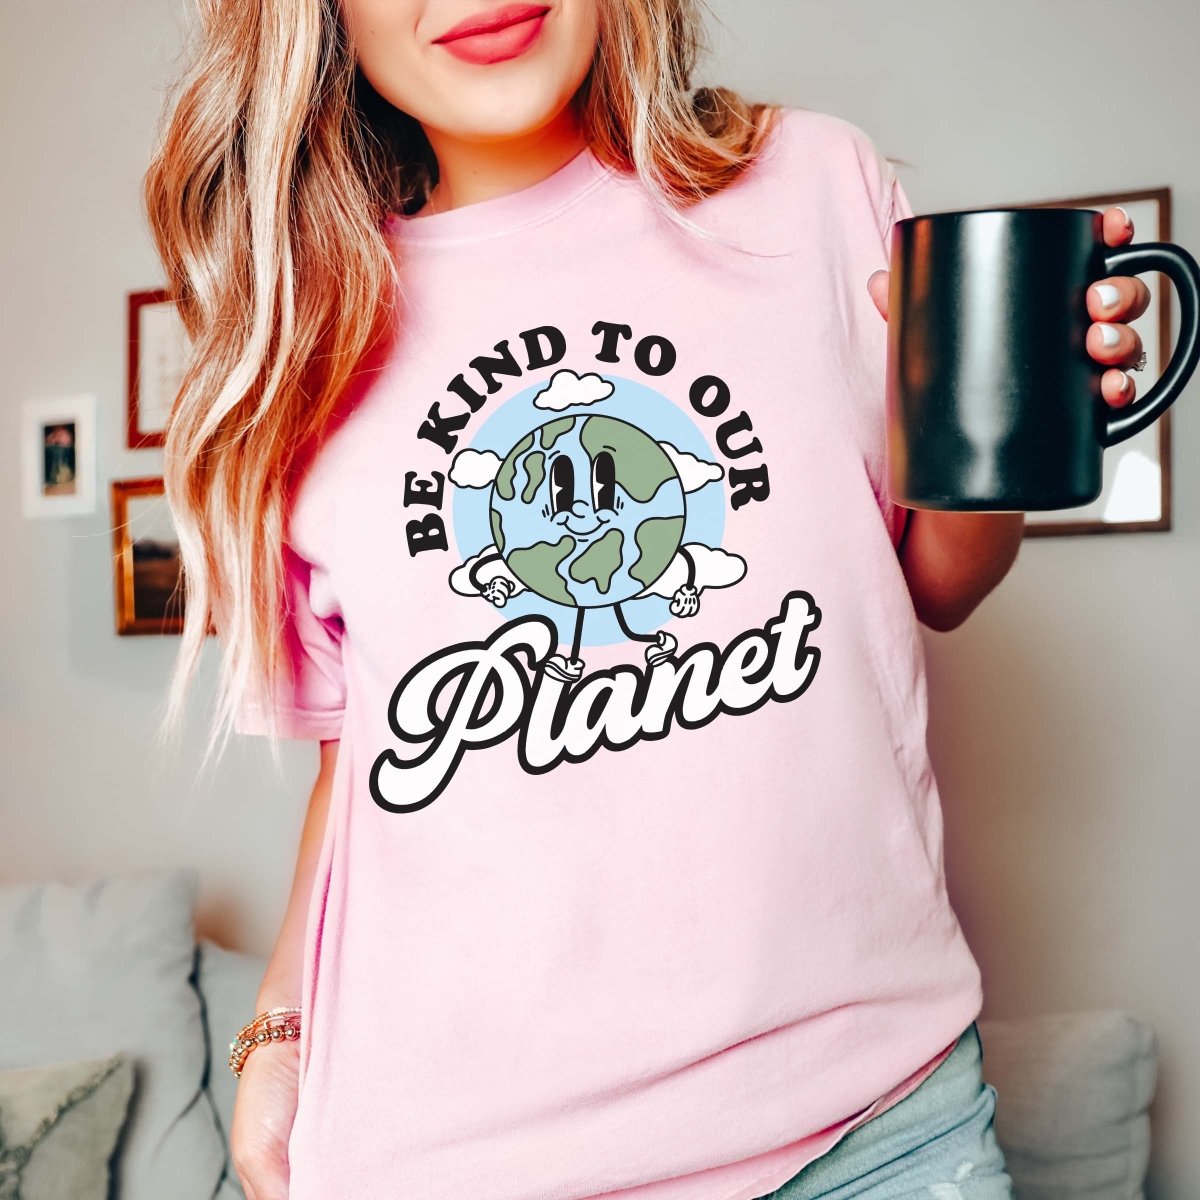 Be kind to our planet Comfort Color Wholesale Tee - Limeberry Designs